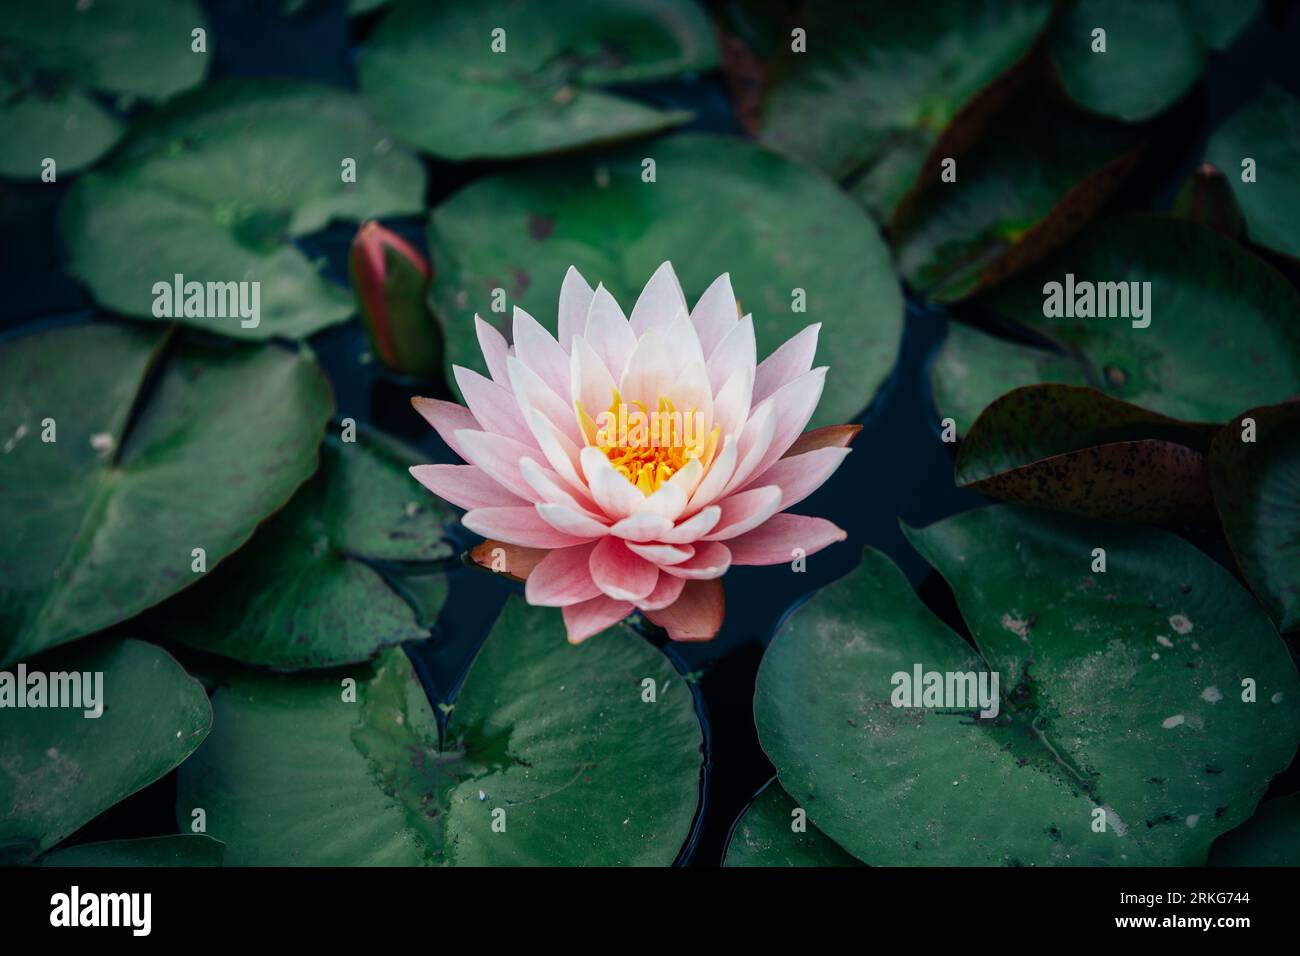 A closeup shot of a blooming water lily flower in a pond with lotus leaves Stock Photo